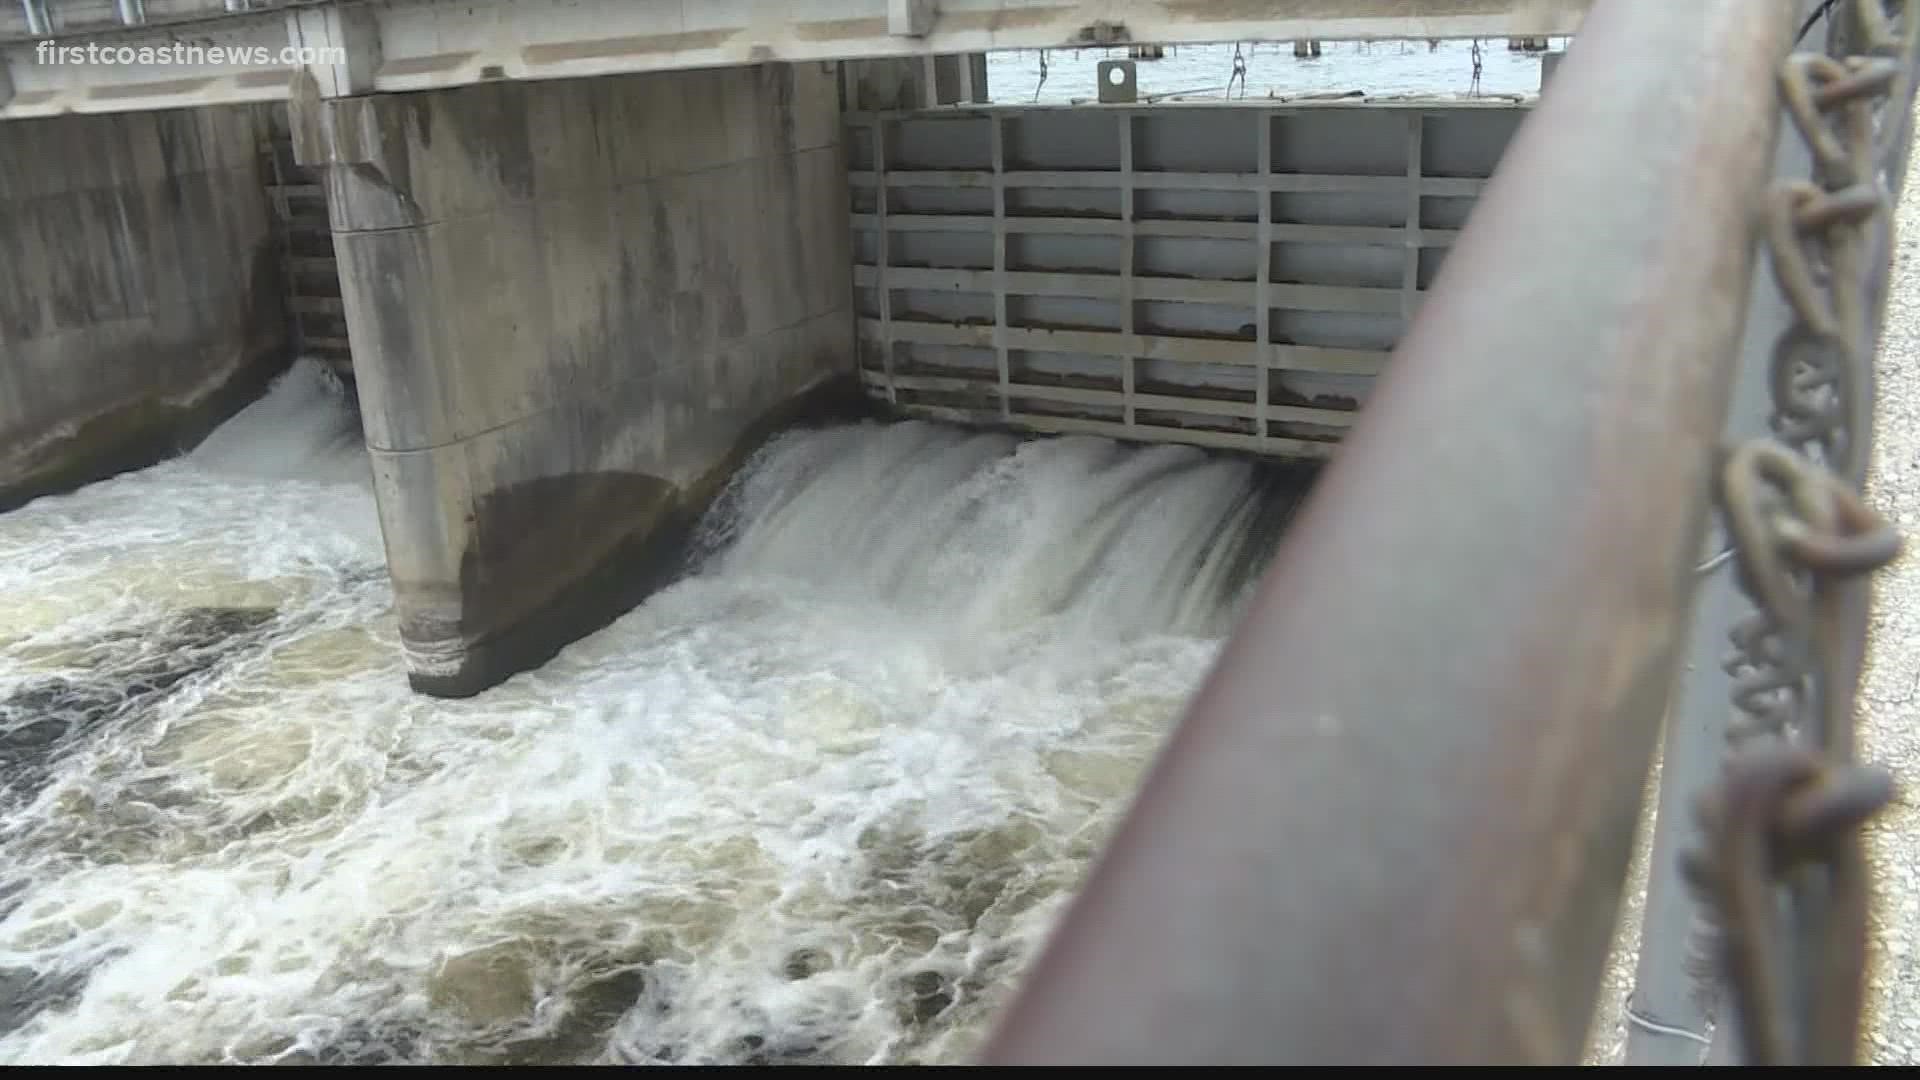 If the dam were to break, more than 400 homes would potentially be put in harm's way.